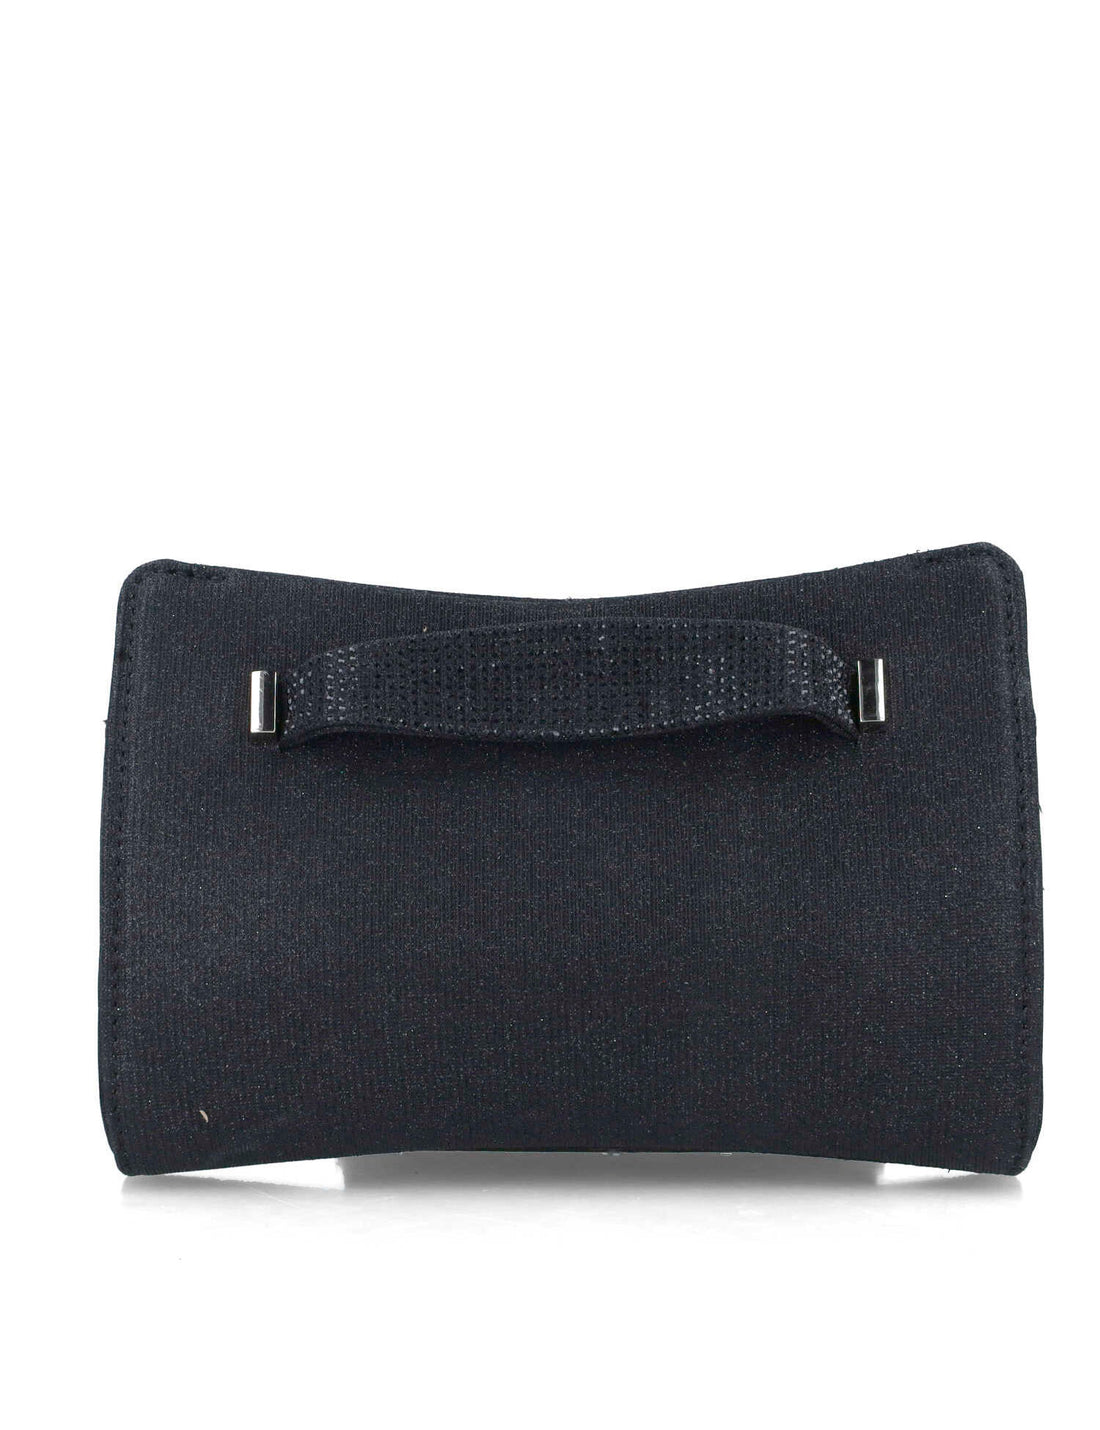 Black Clutch With Hand Strap_85510_01_01